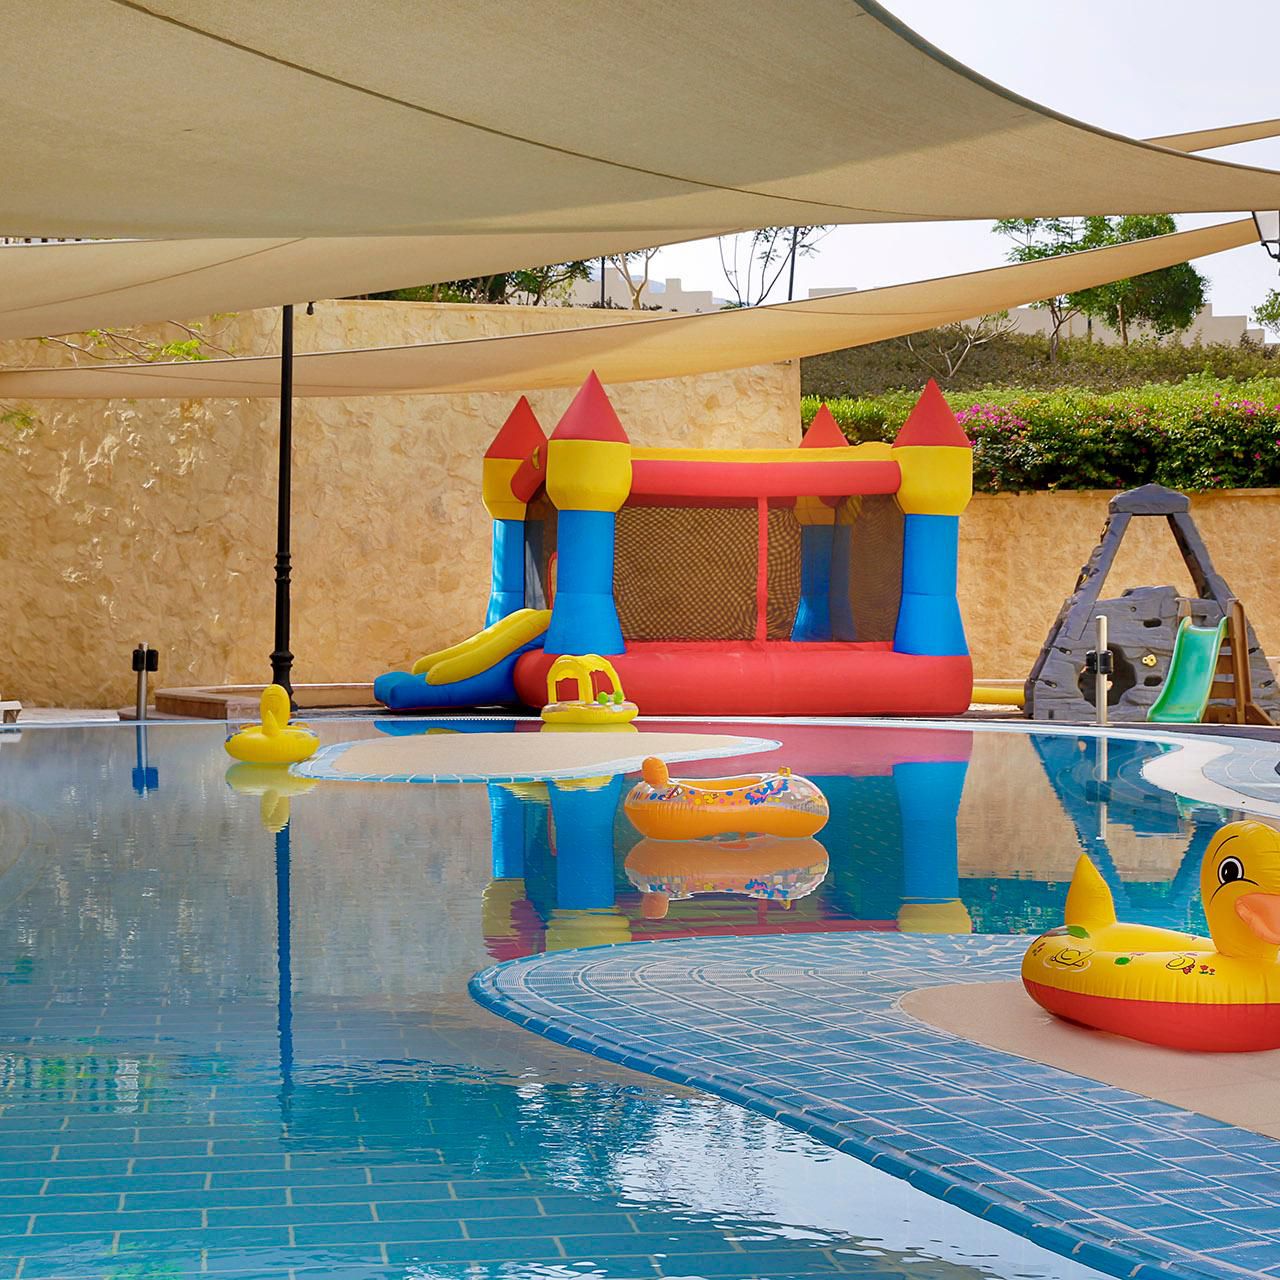 Your kids are safe with our shaded heated kids pool